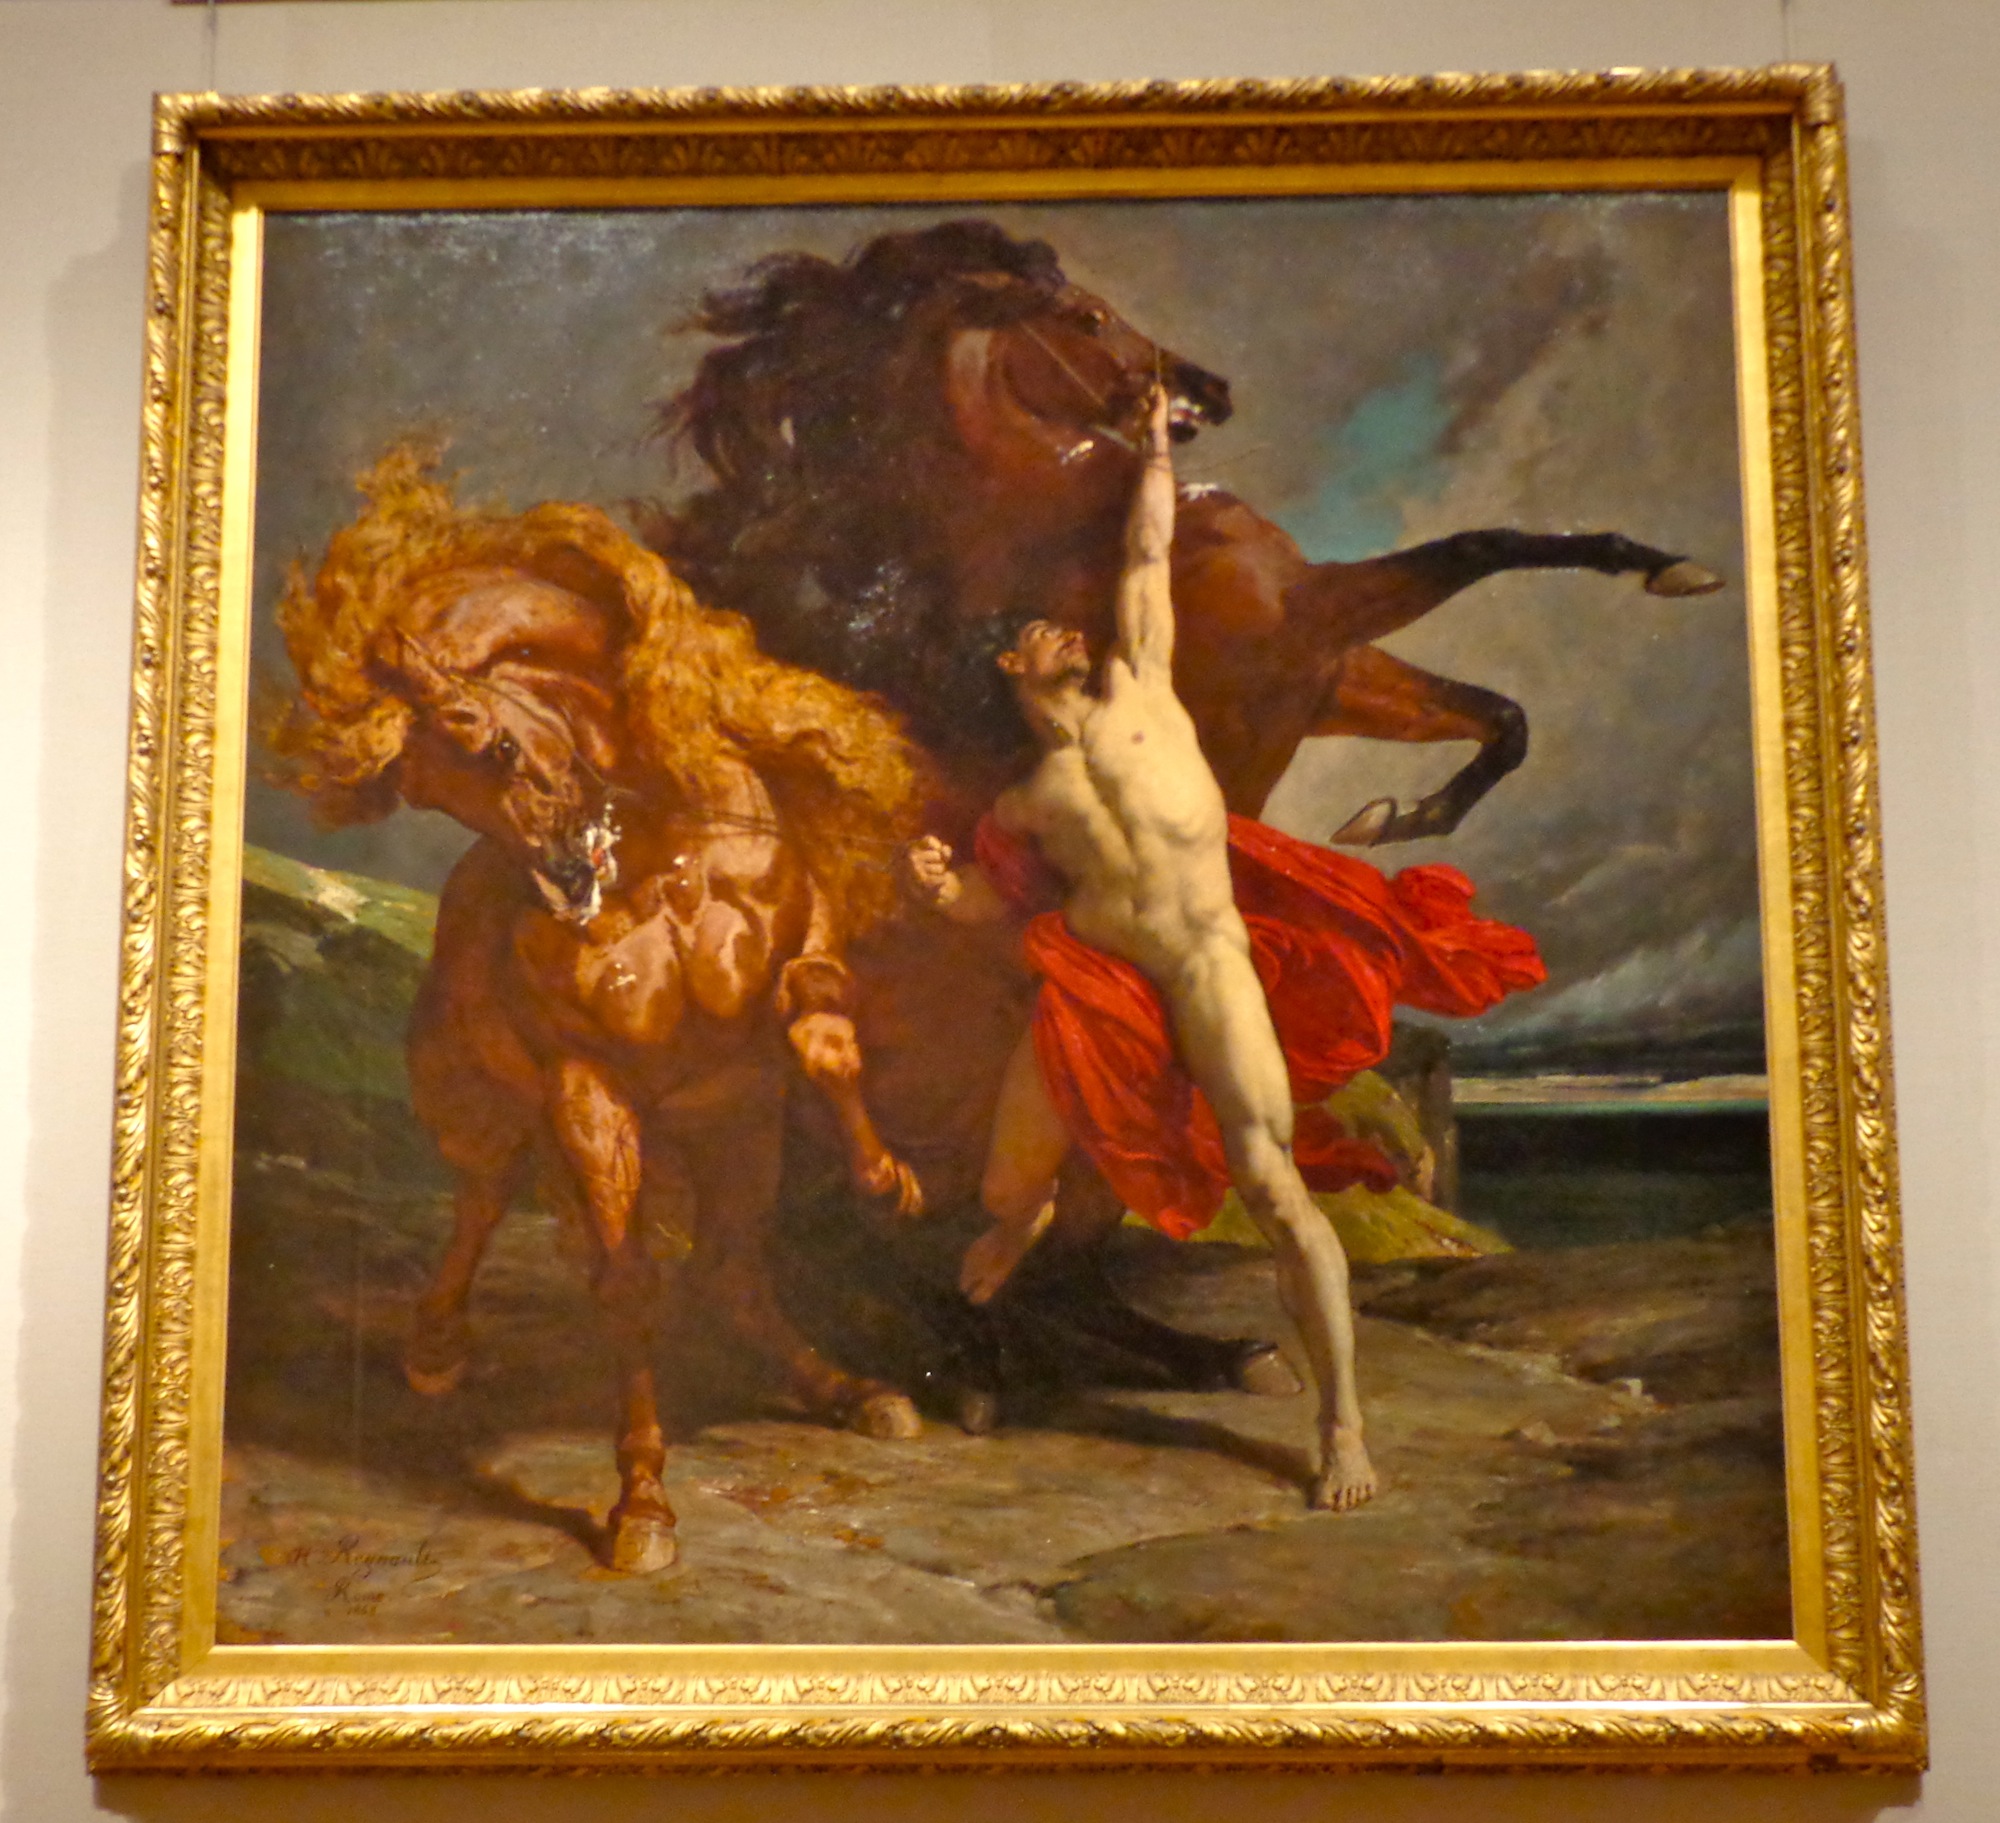 Alexandre-Georges-Henri Regnault, "Automedon with the Horses of Achilles," 1868